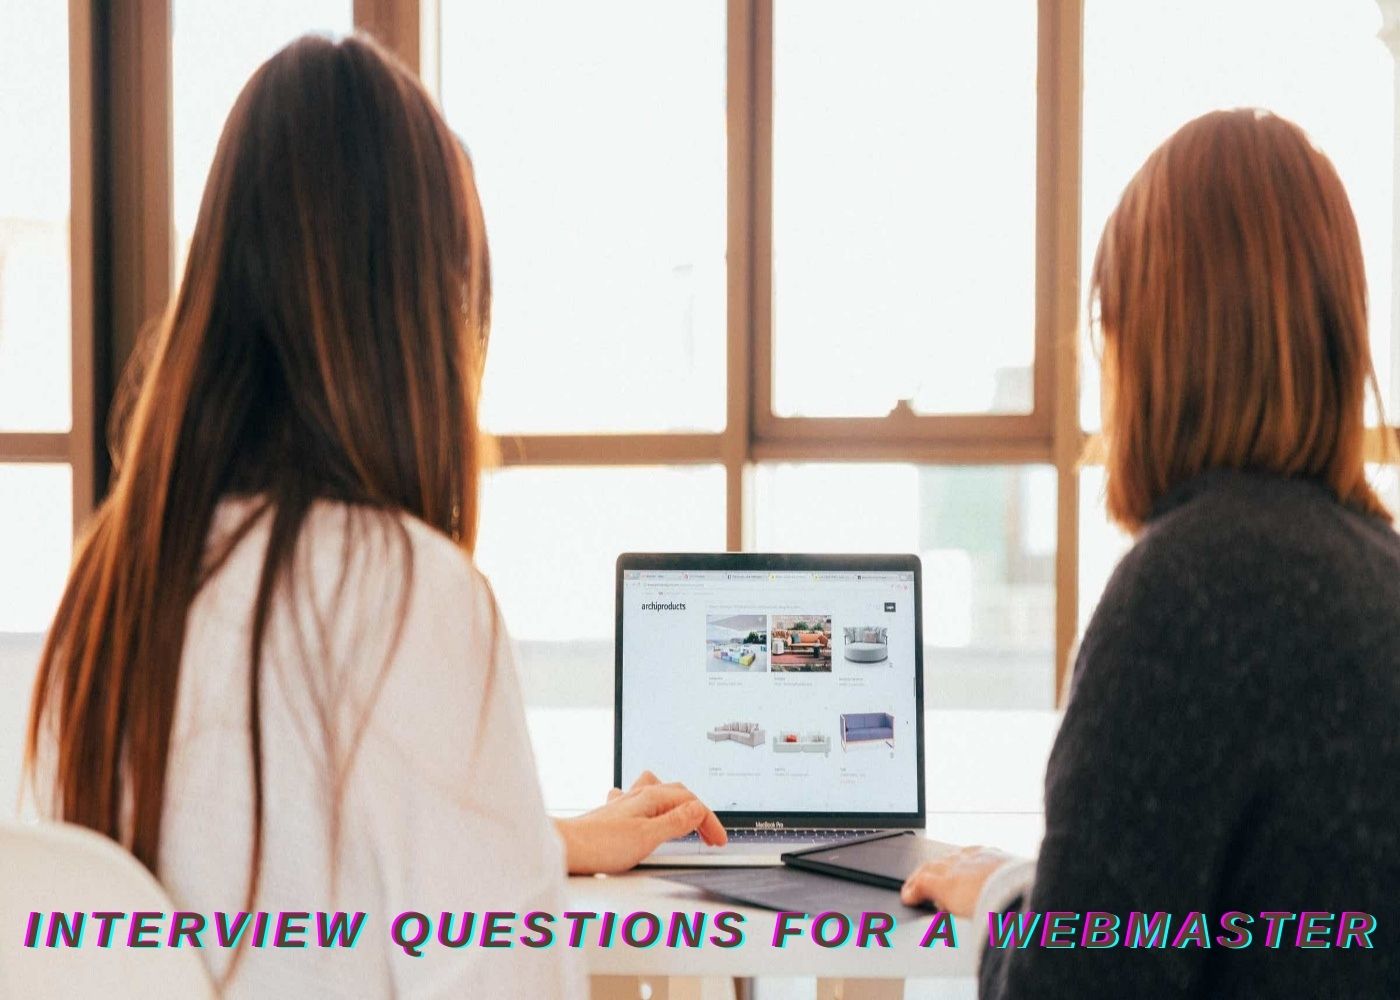 Interview questions for a webmaster